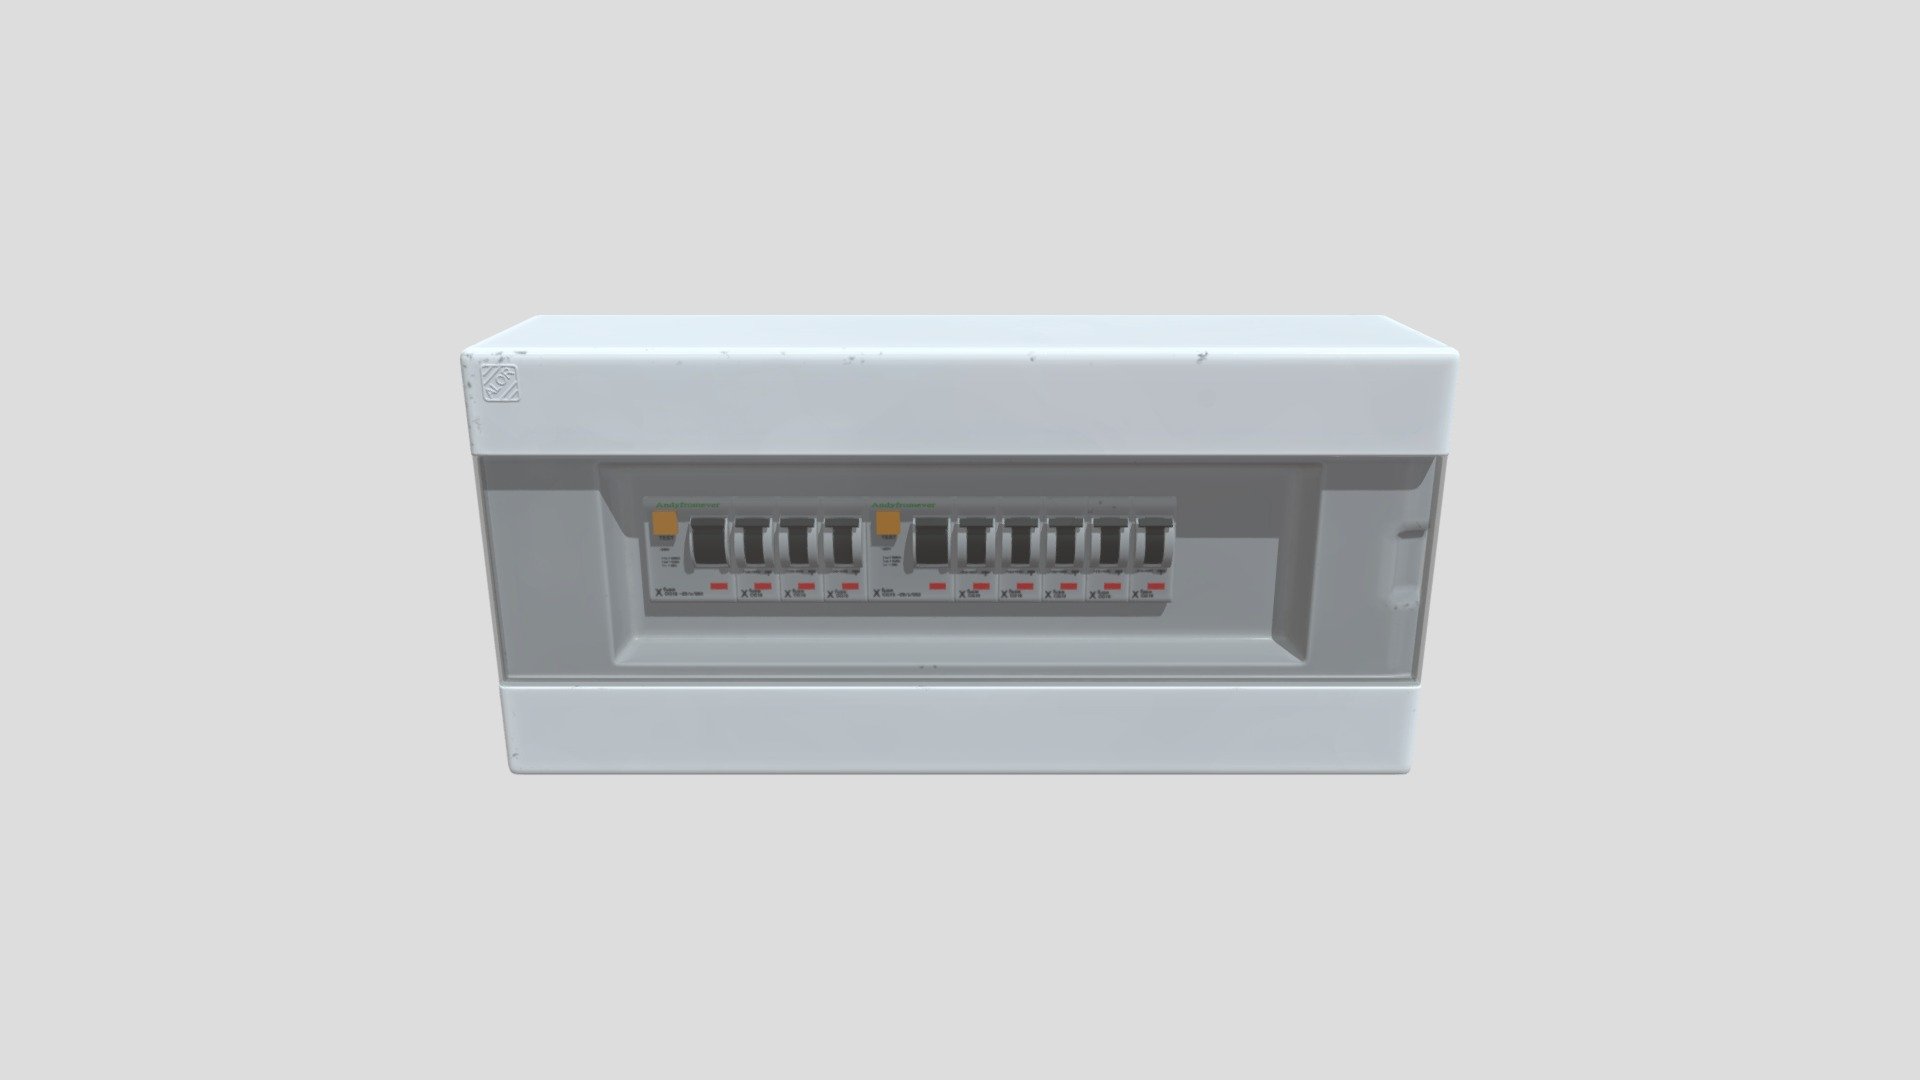 Highly detailed 3d model of fuse box with all textures, shaders and materials. This 3d model is ready to use, just put it into your scene 3d model